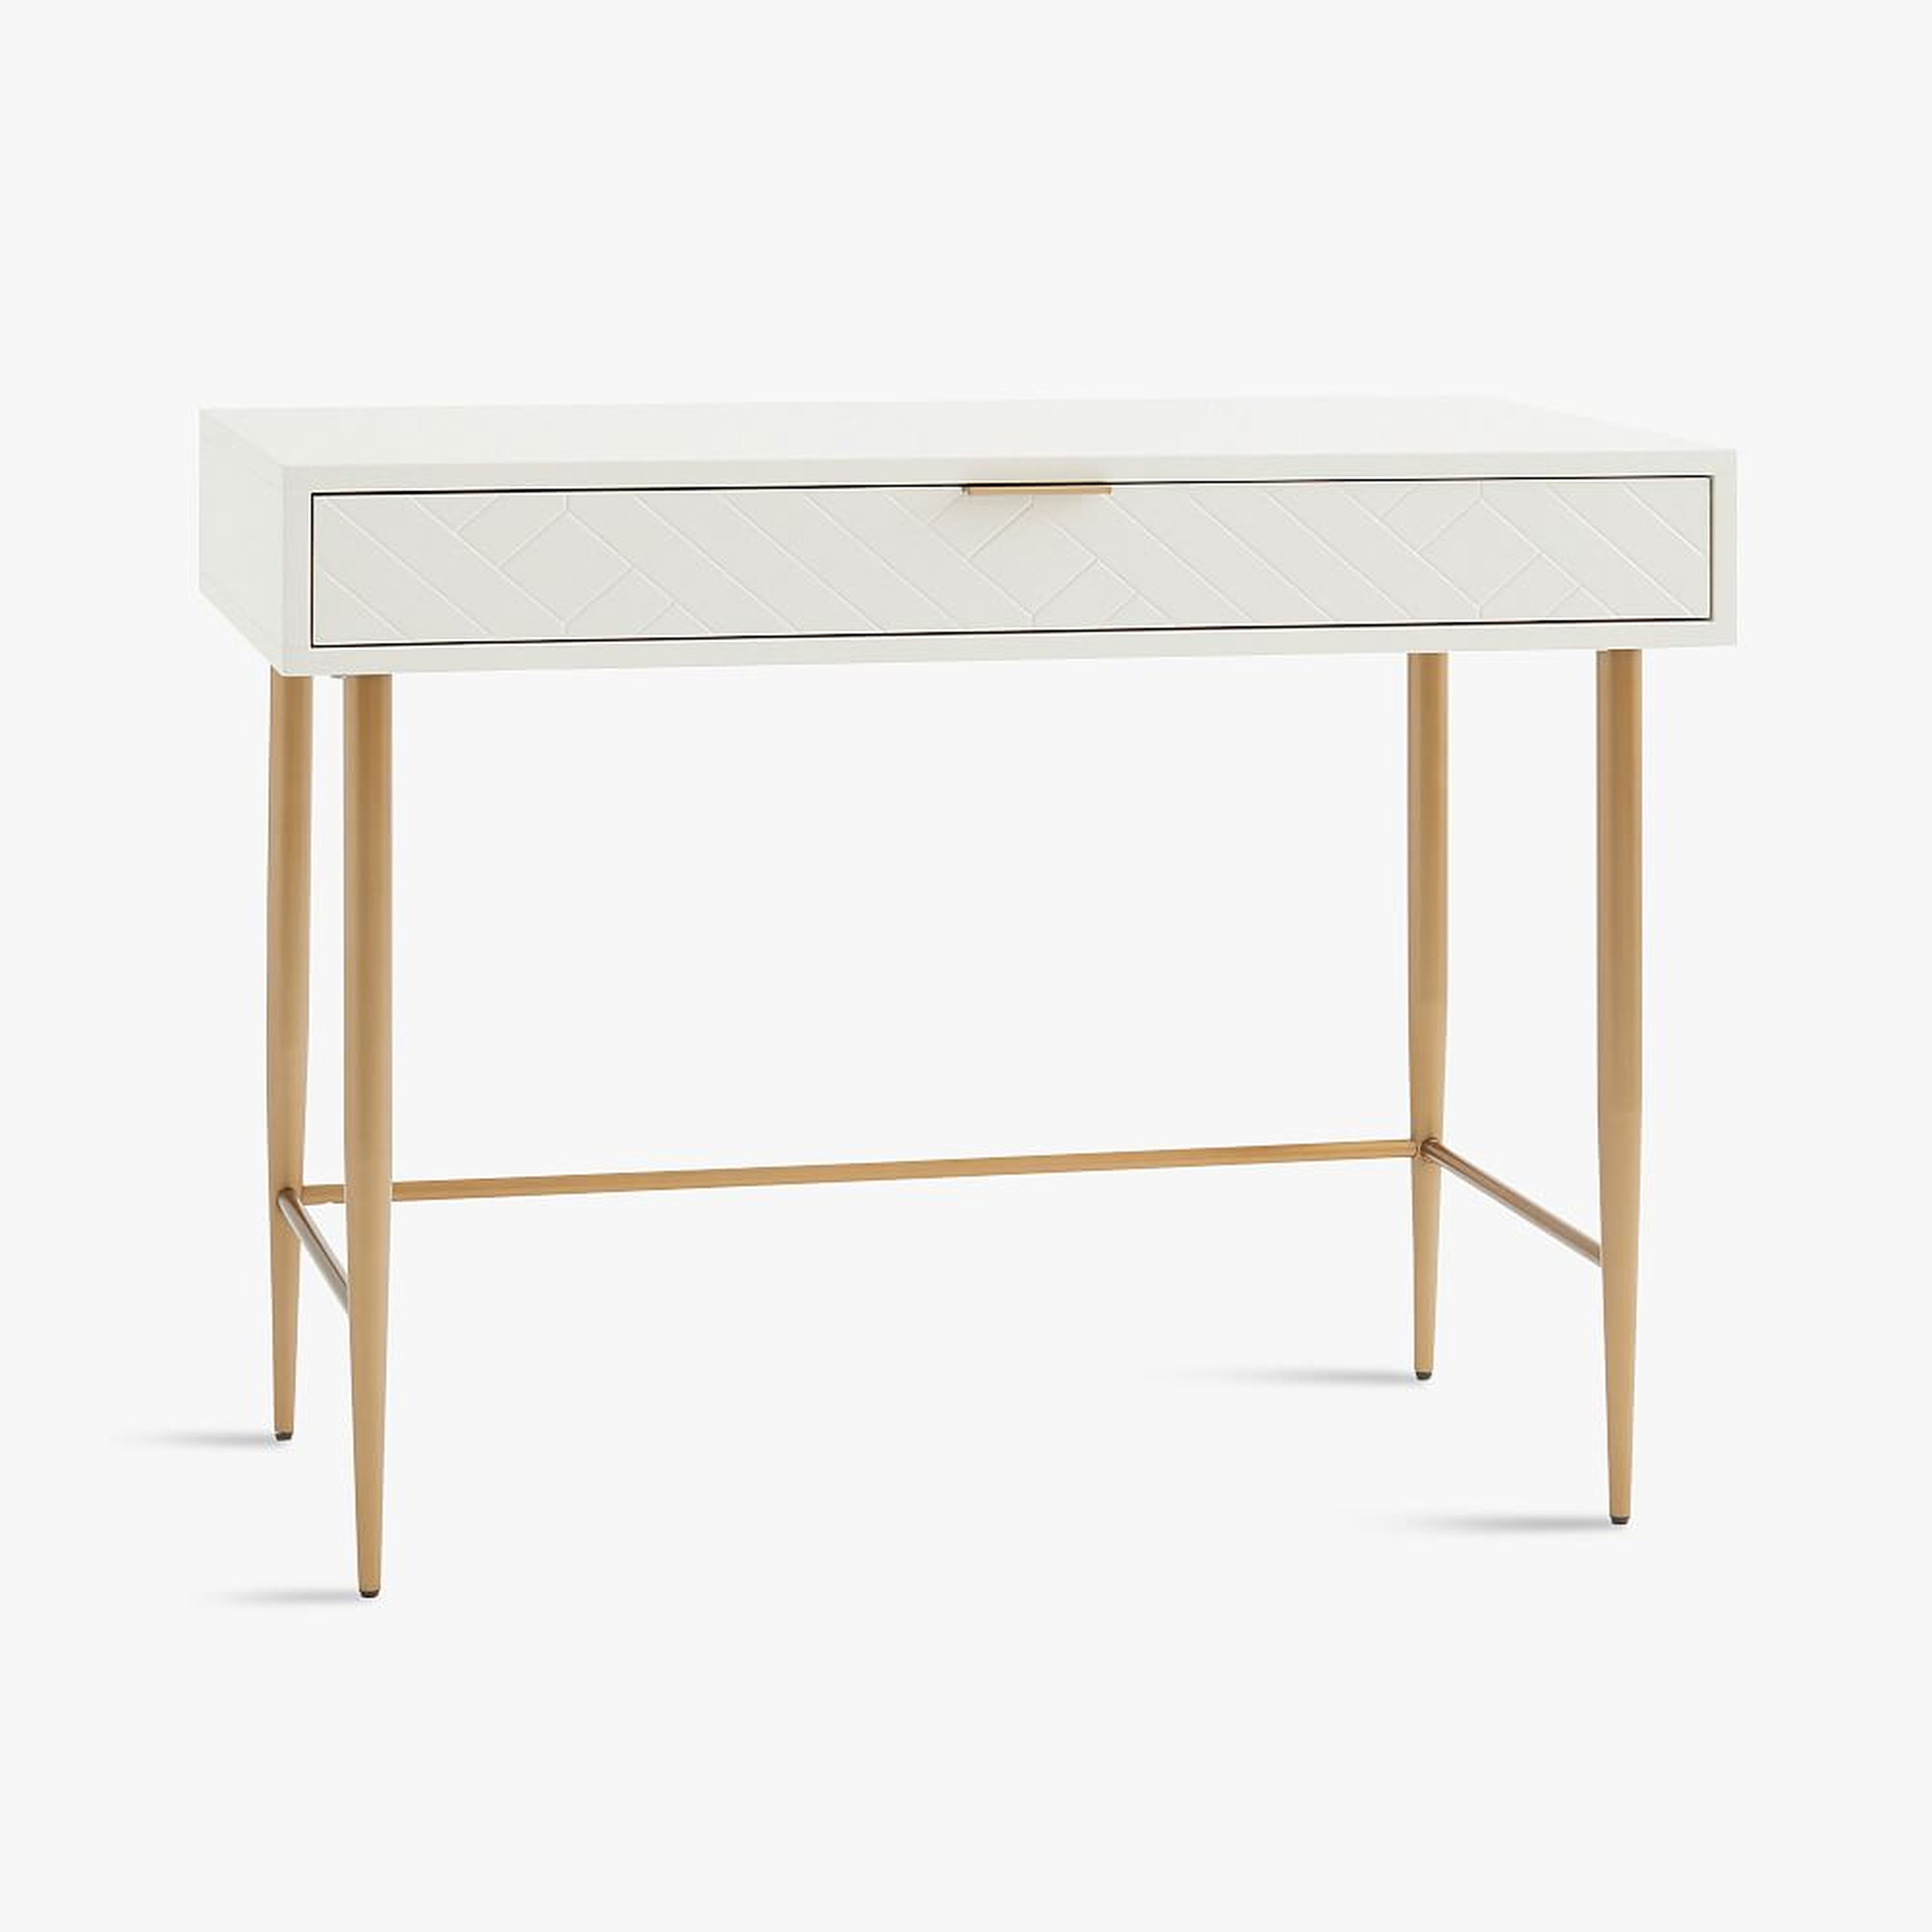 Jennings Small Space Desk, Simply White - Pottery Barn Teen